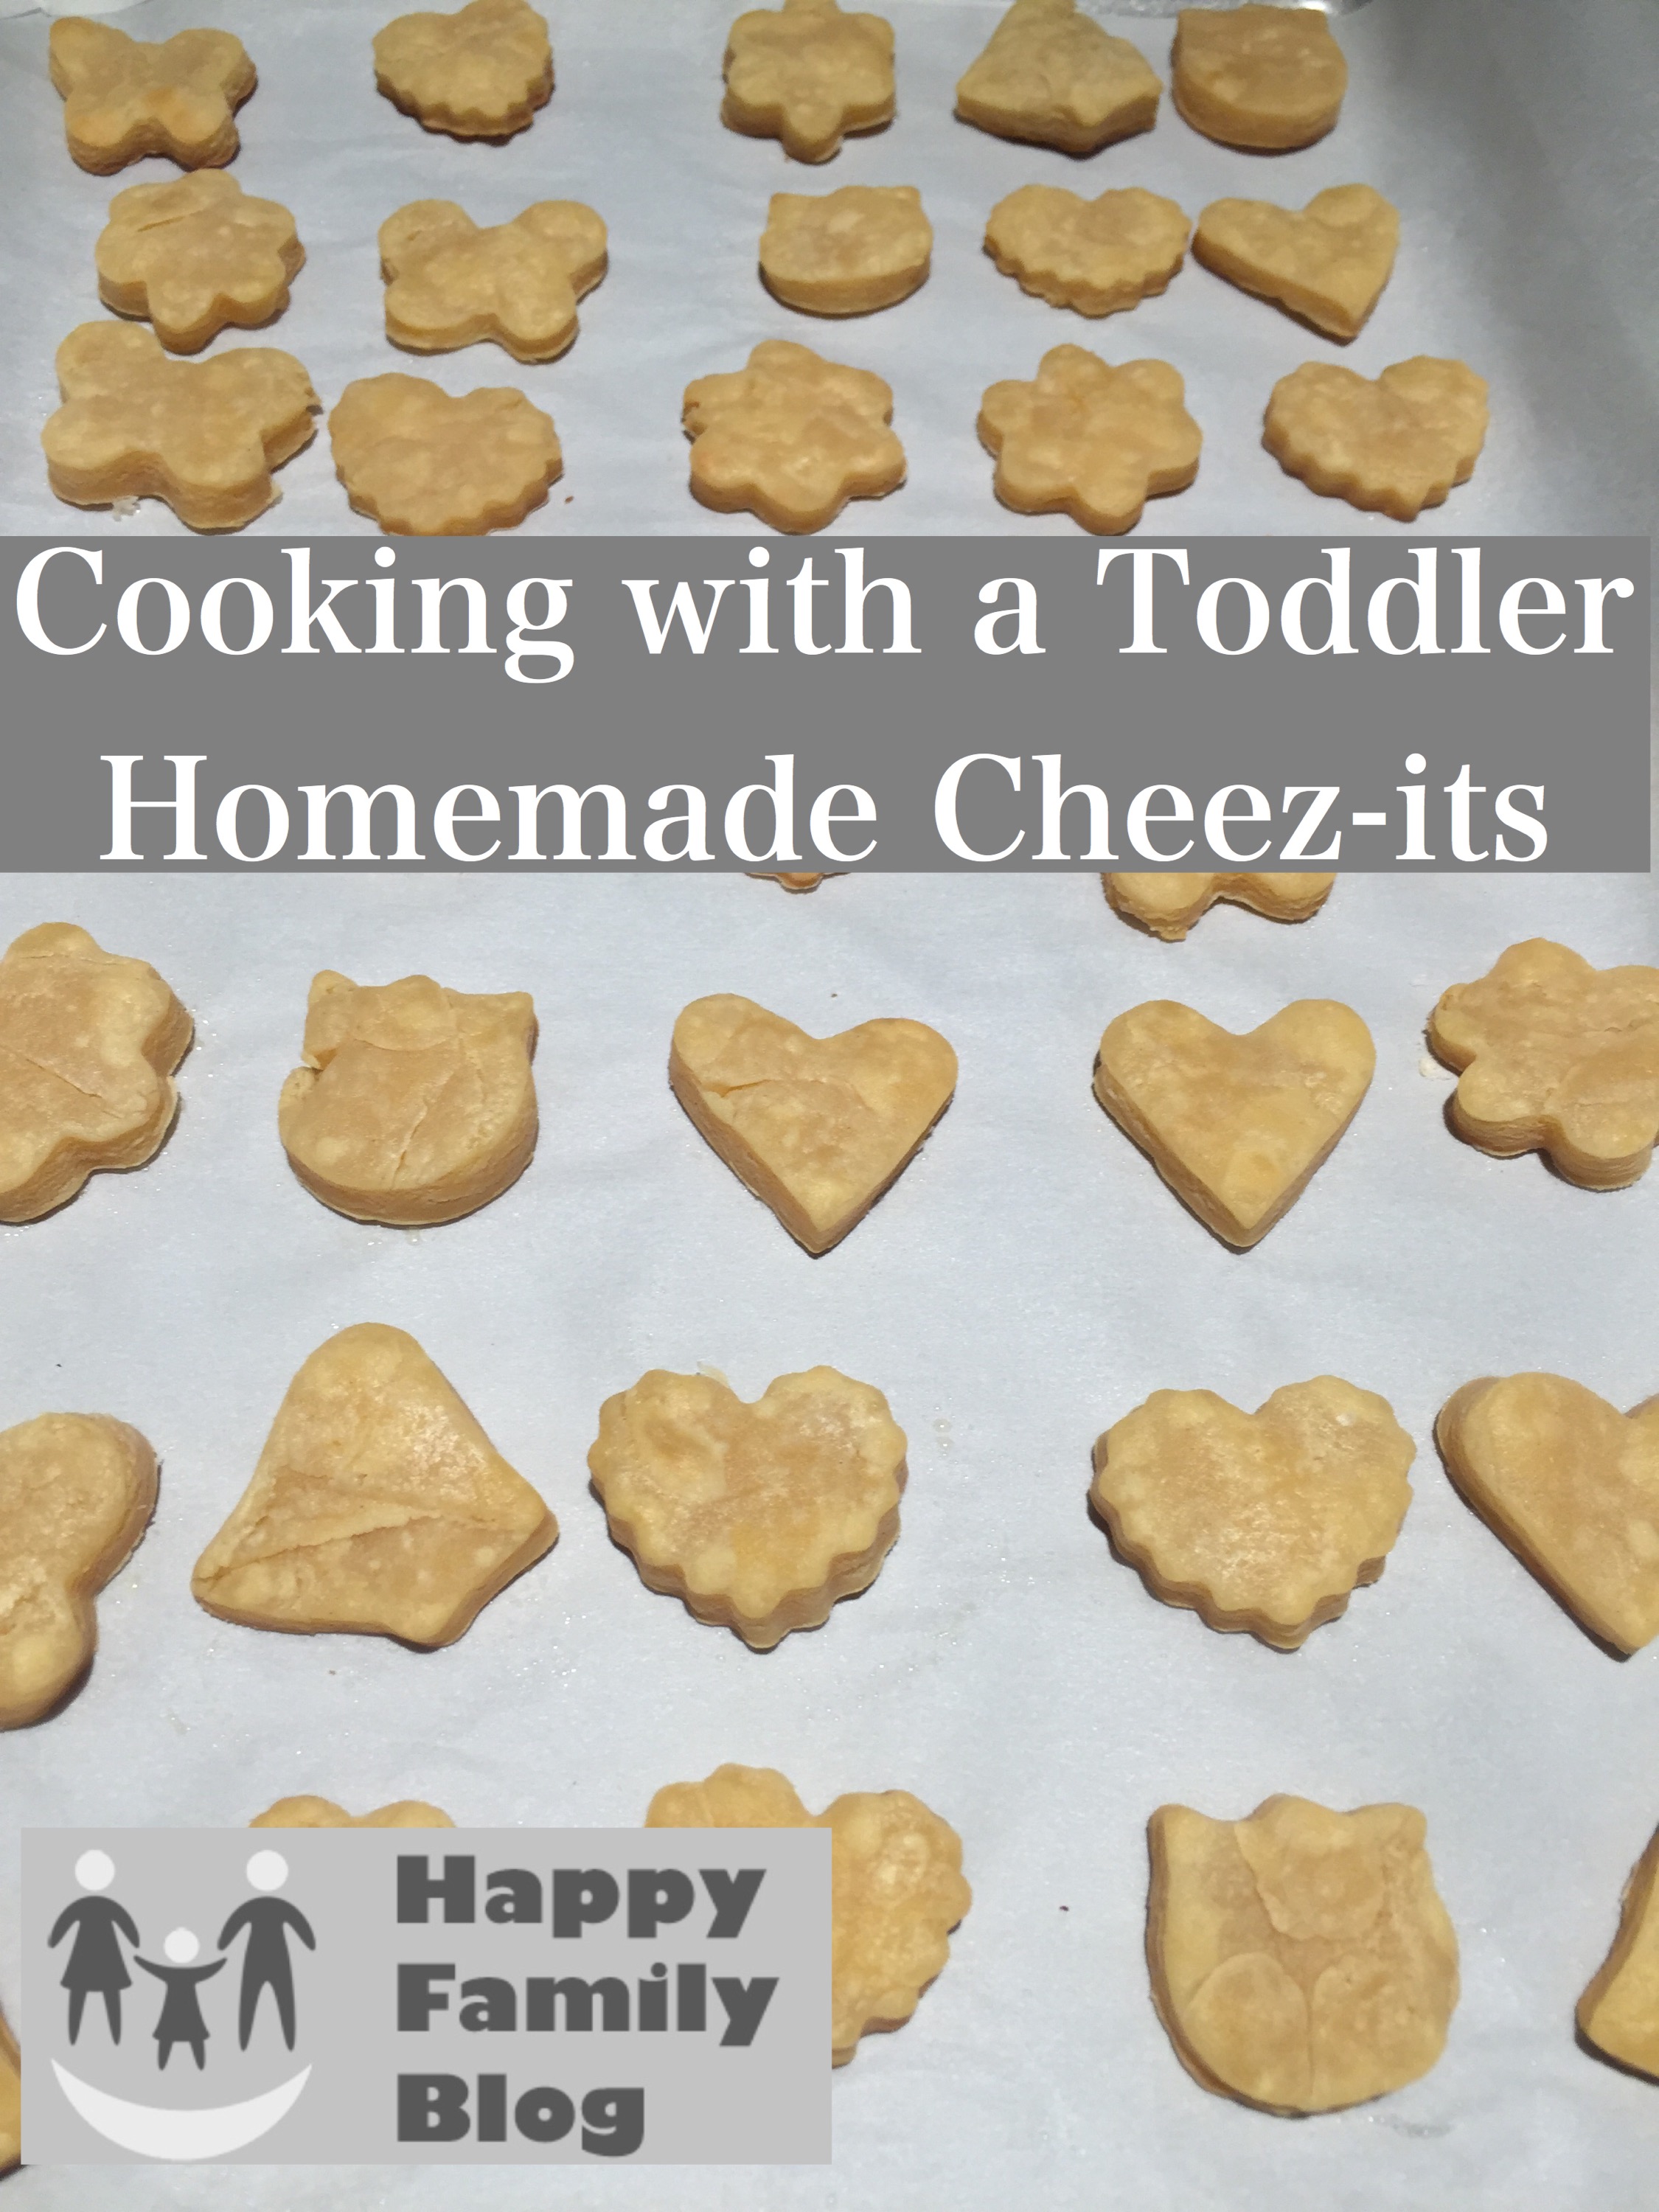 Cooking with a Toddler: Homemade Cheez-its